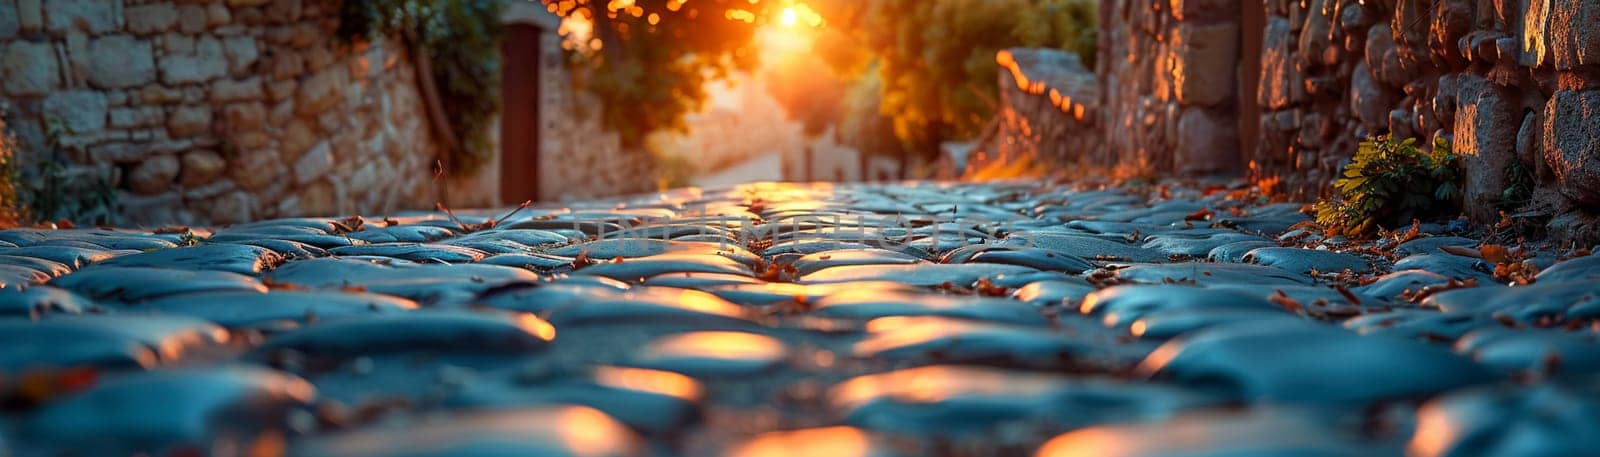 Cobbled Streets Winding Through an Old Town at Dusk, The stones blur into the twilight, a path well-traveled and worn.